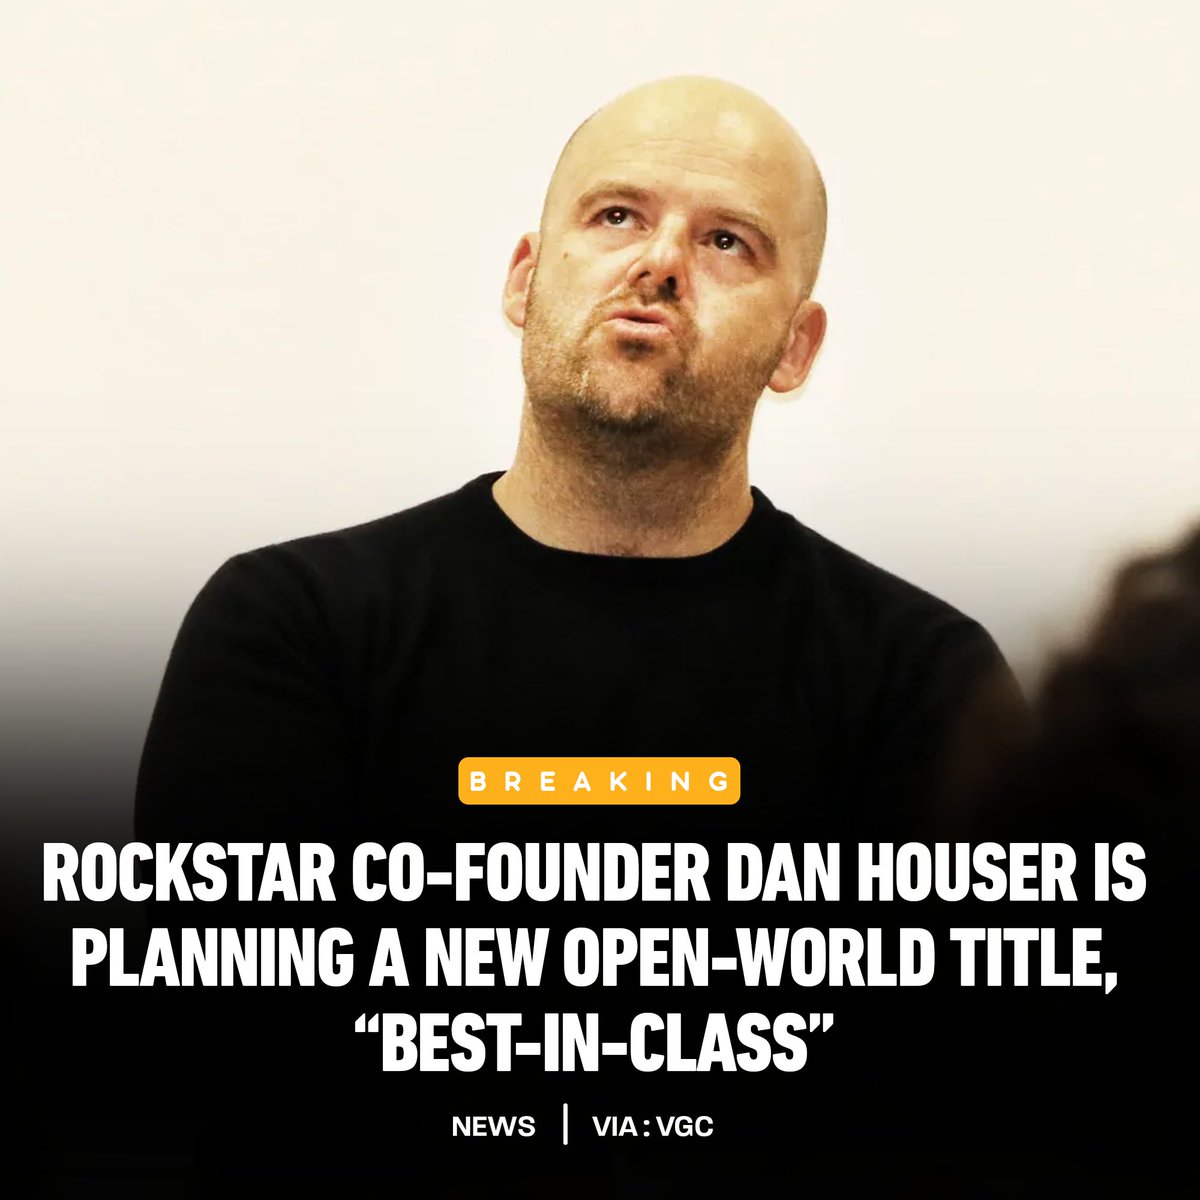 BREAKING: Rockstar co-founder Dan Houser is planning a new open-world game.

'Best-in-class combat and third person action across multiple game modes' 

Via @VGC_News
videogameschronicle.com/news/rockstar-…